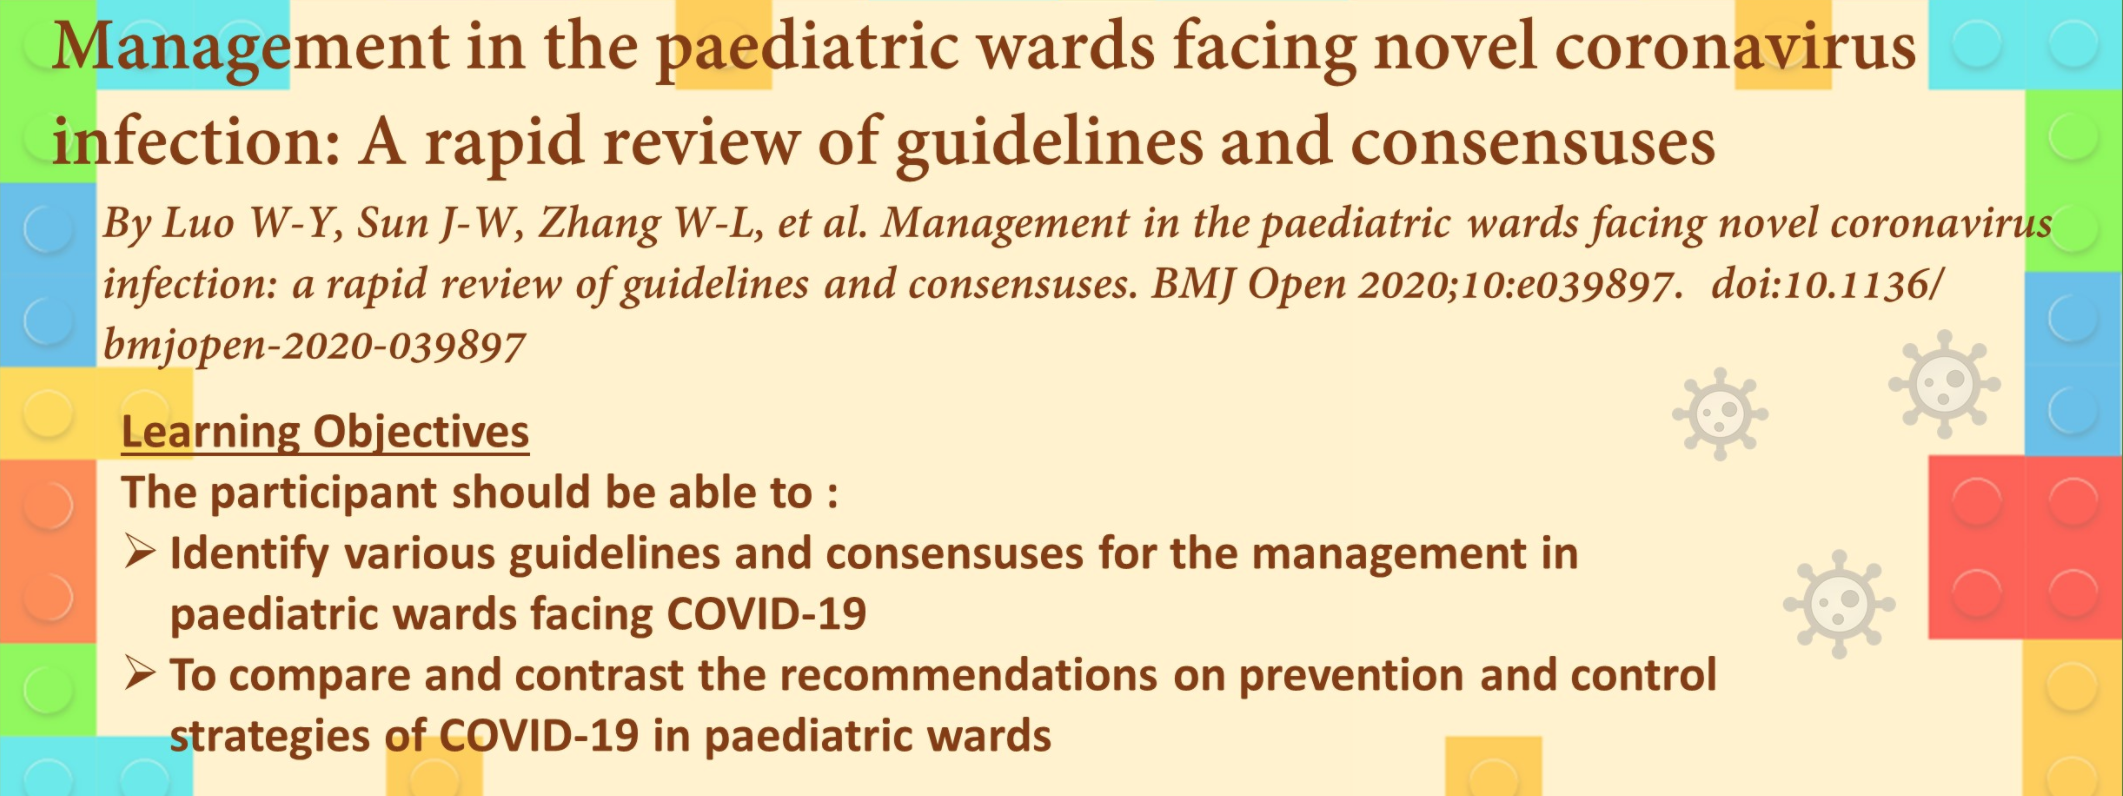 Management in the paediatric wards facing novel coronavirus infection: A rapid review of guidelines and consensuses